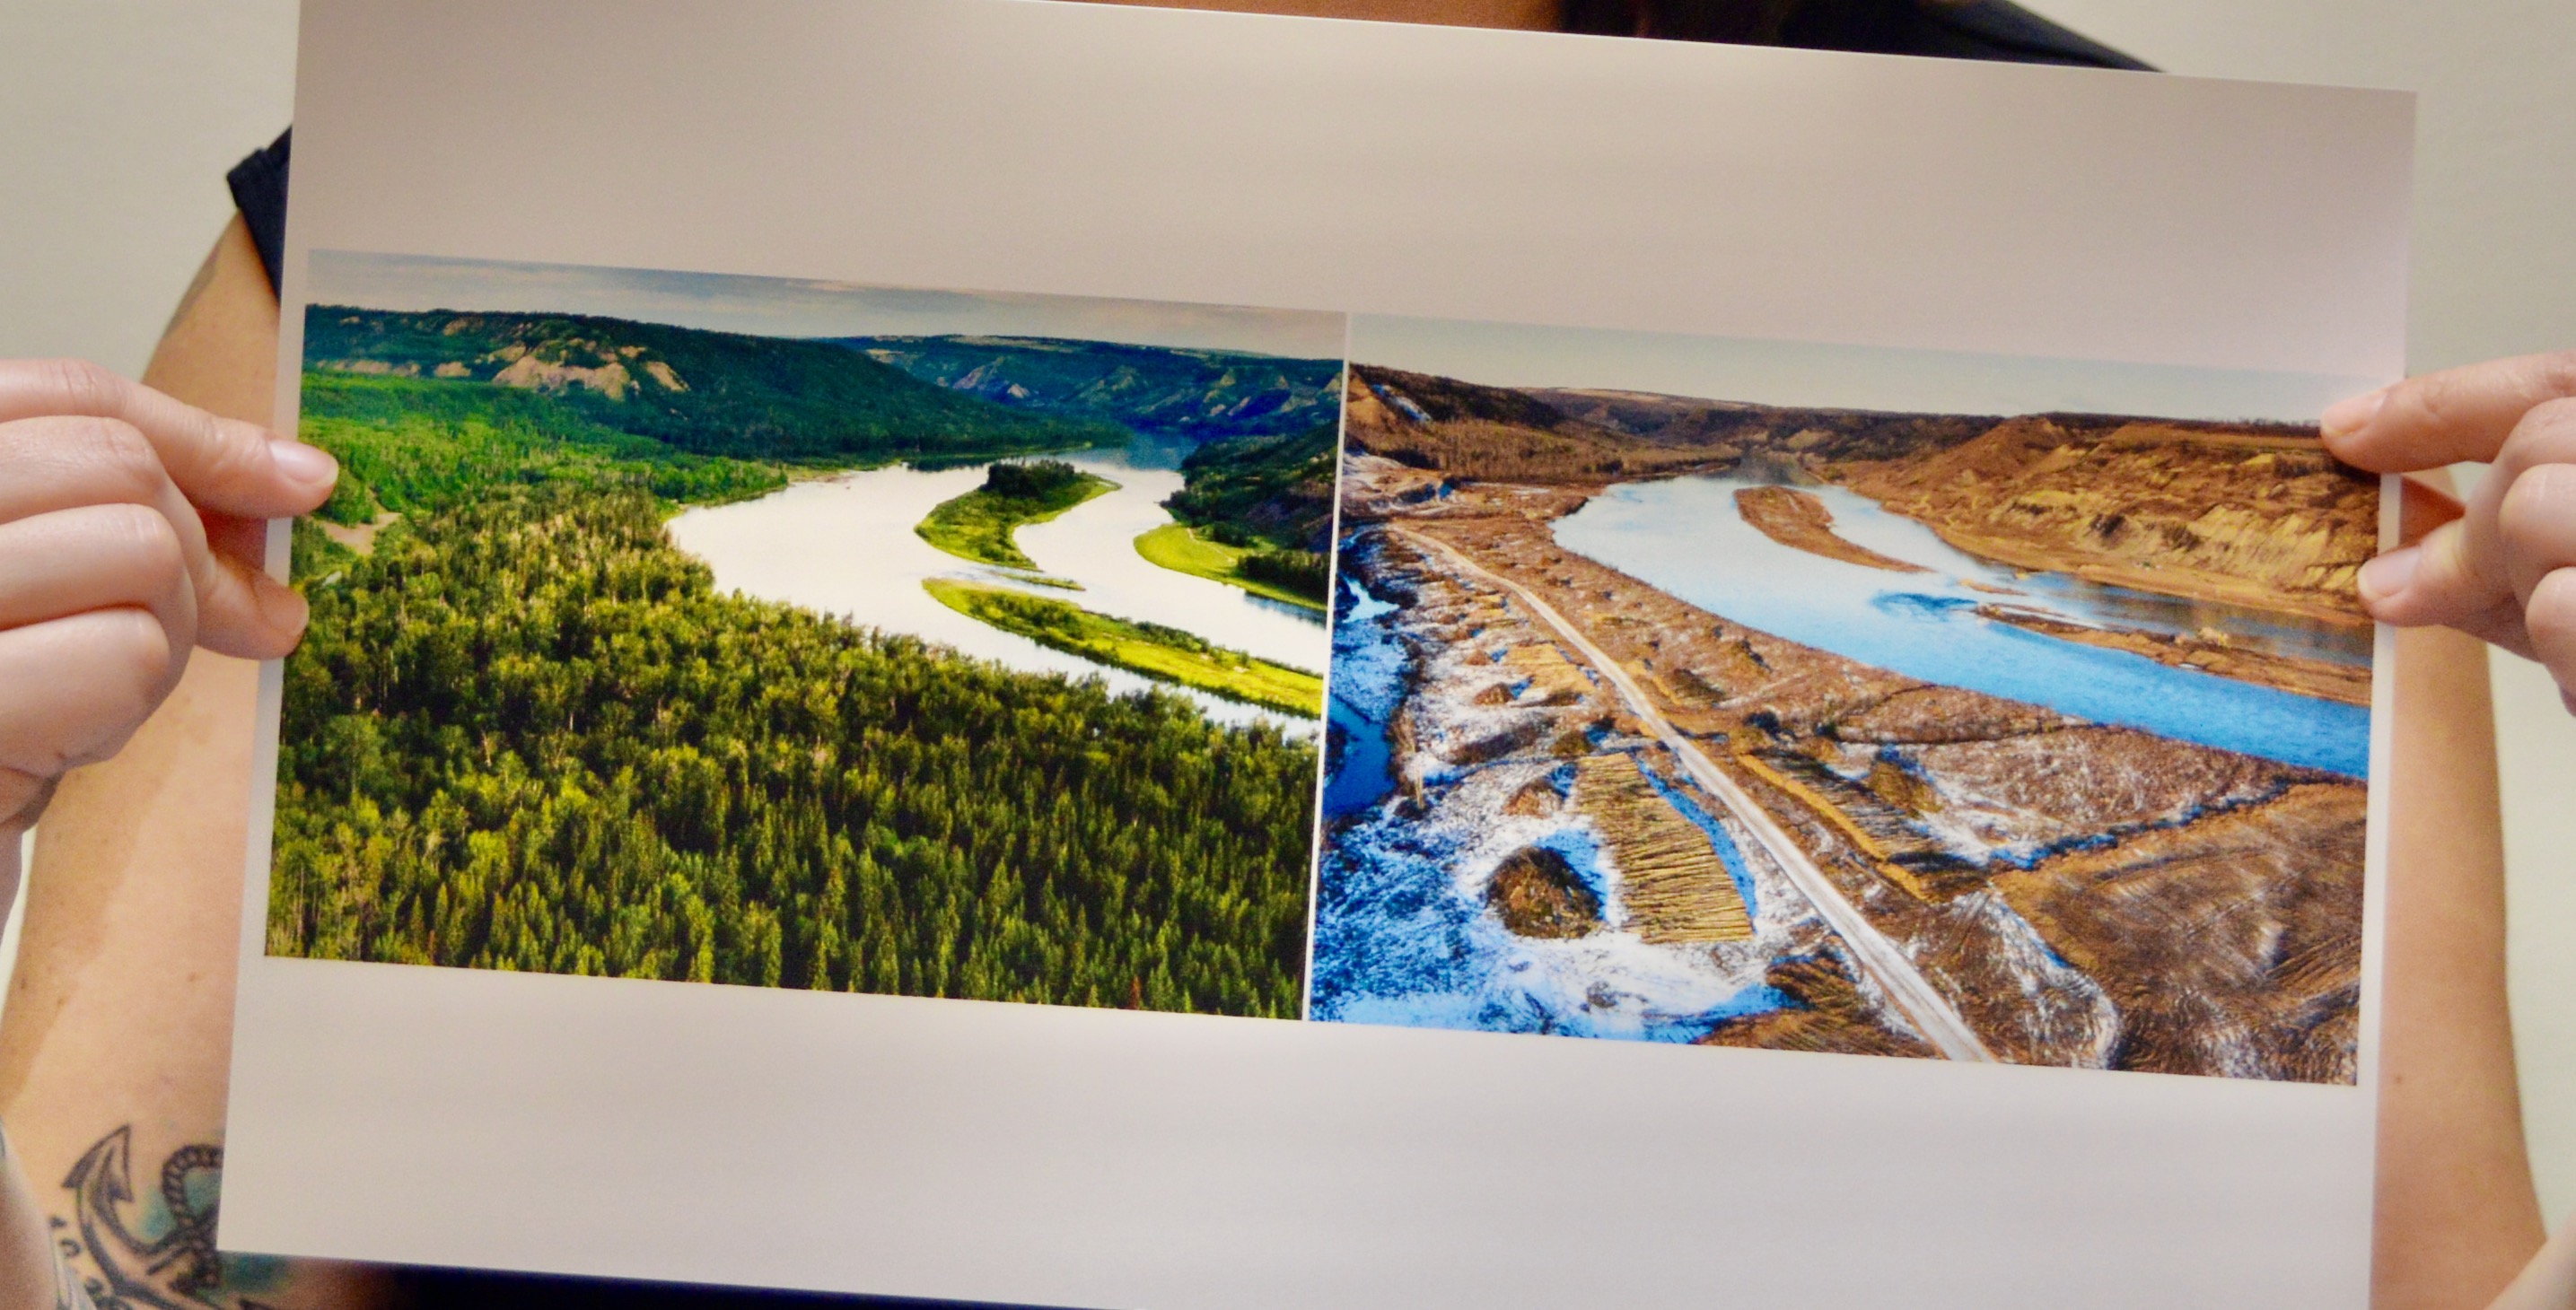 Helen Knott of West Moberly First Nation holds up contrasting images of Peace River, before and after dam construction began, in 2016. Image: Chelsea Nash/Used with permission